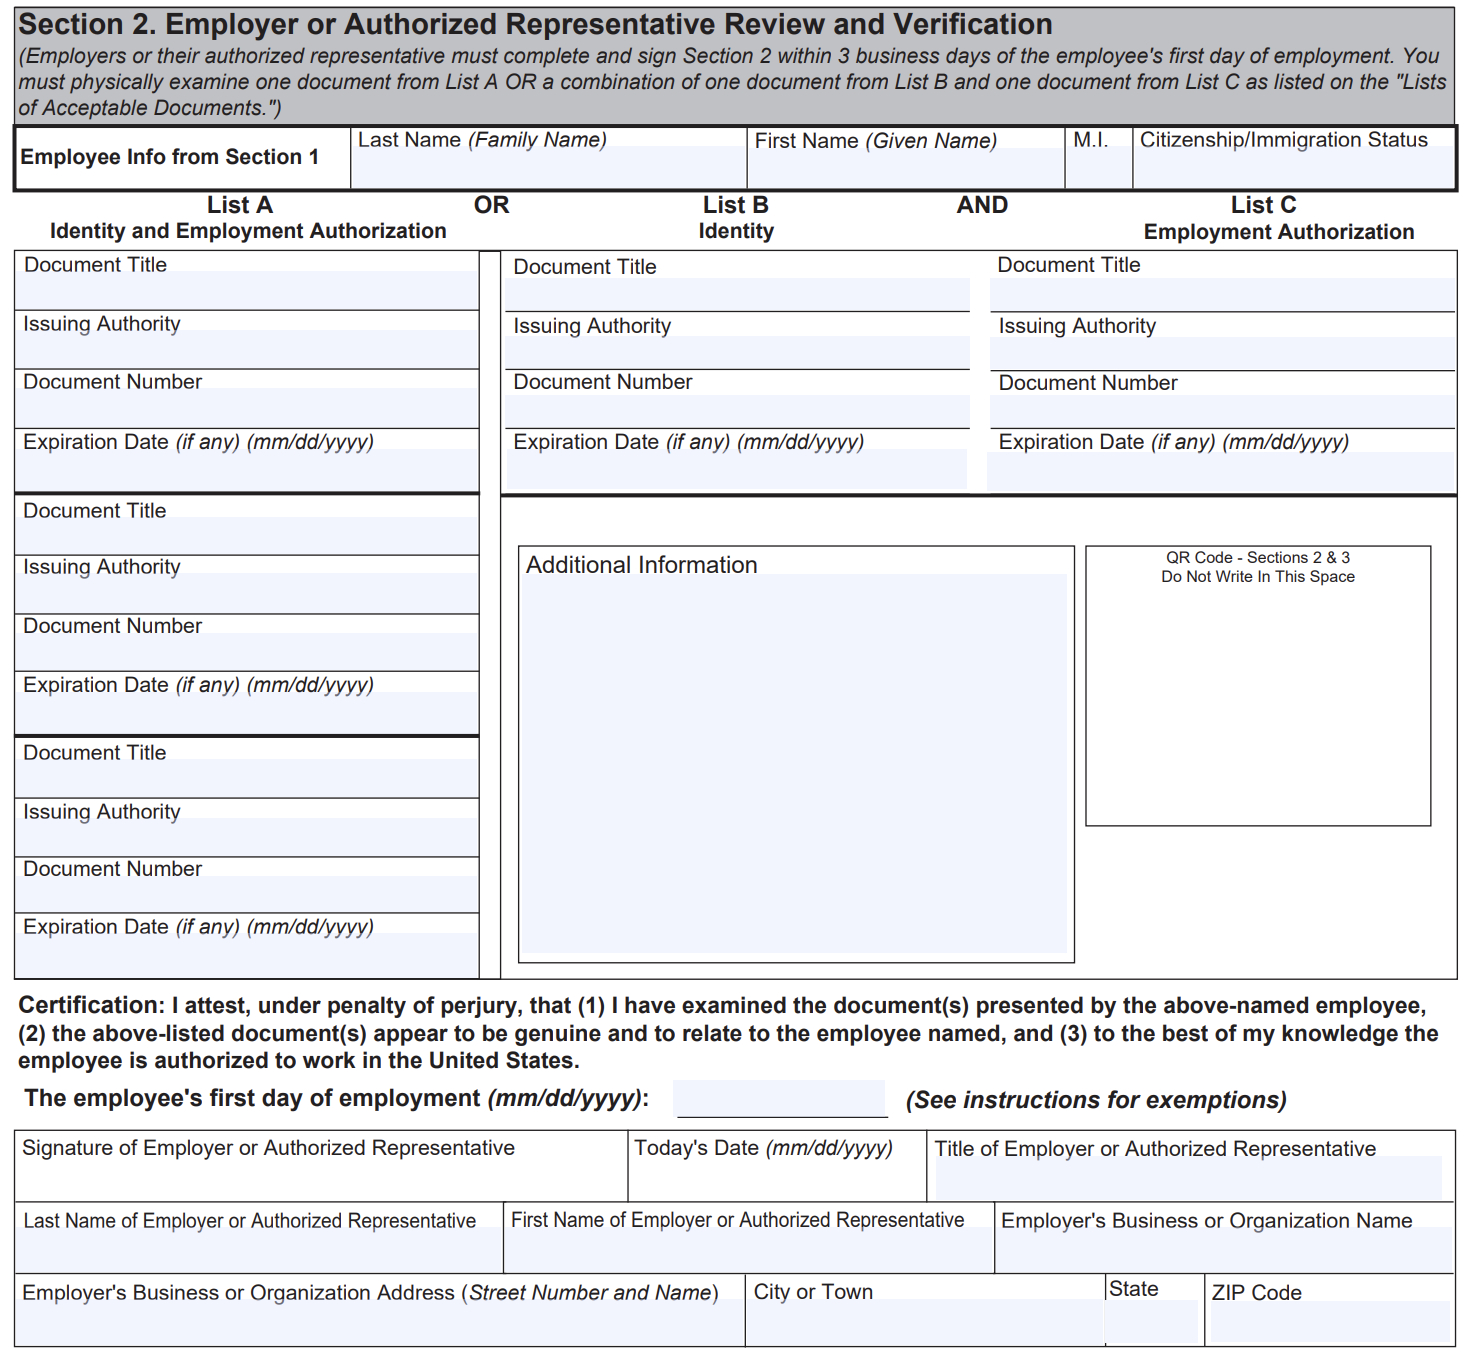 What Is Form I-9? regarding IRS I-9 Form